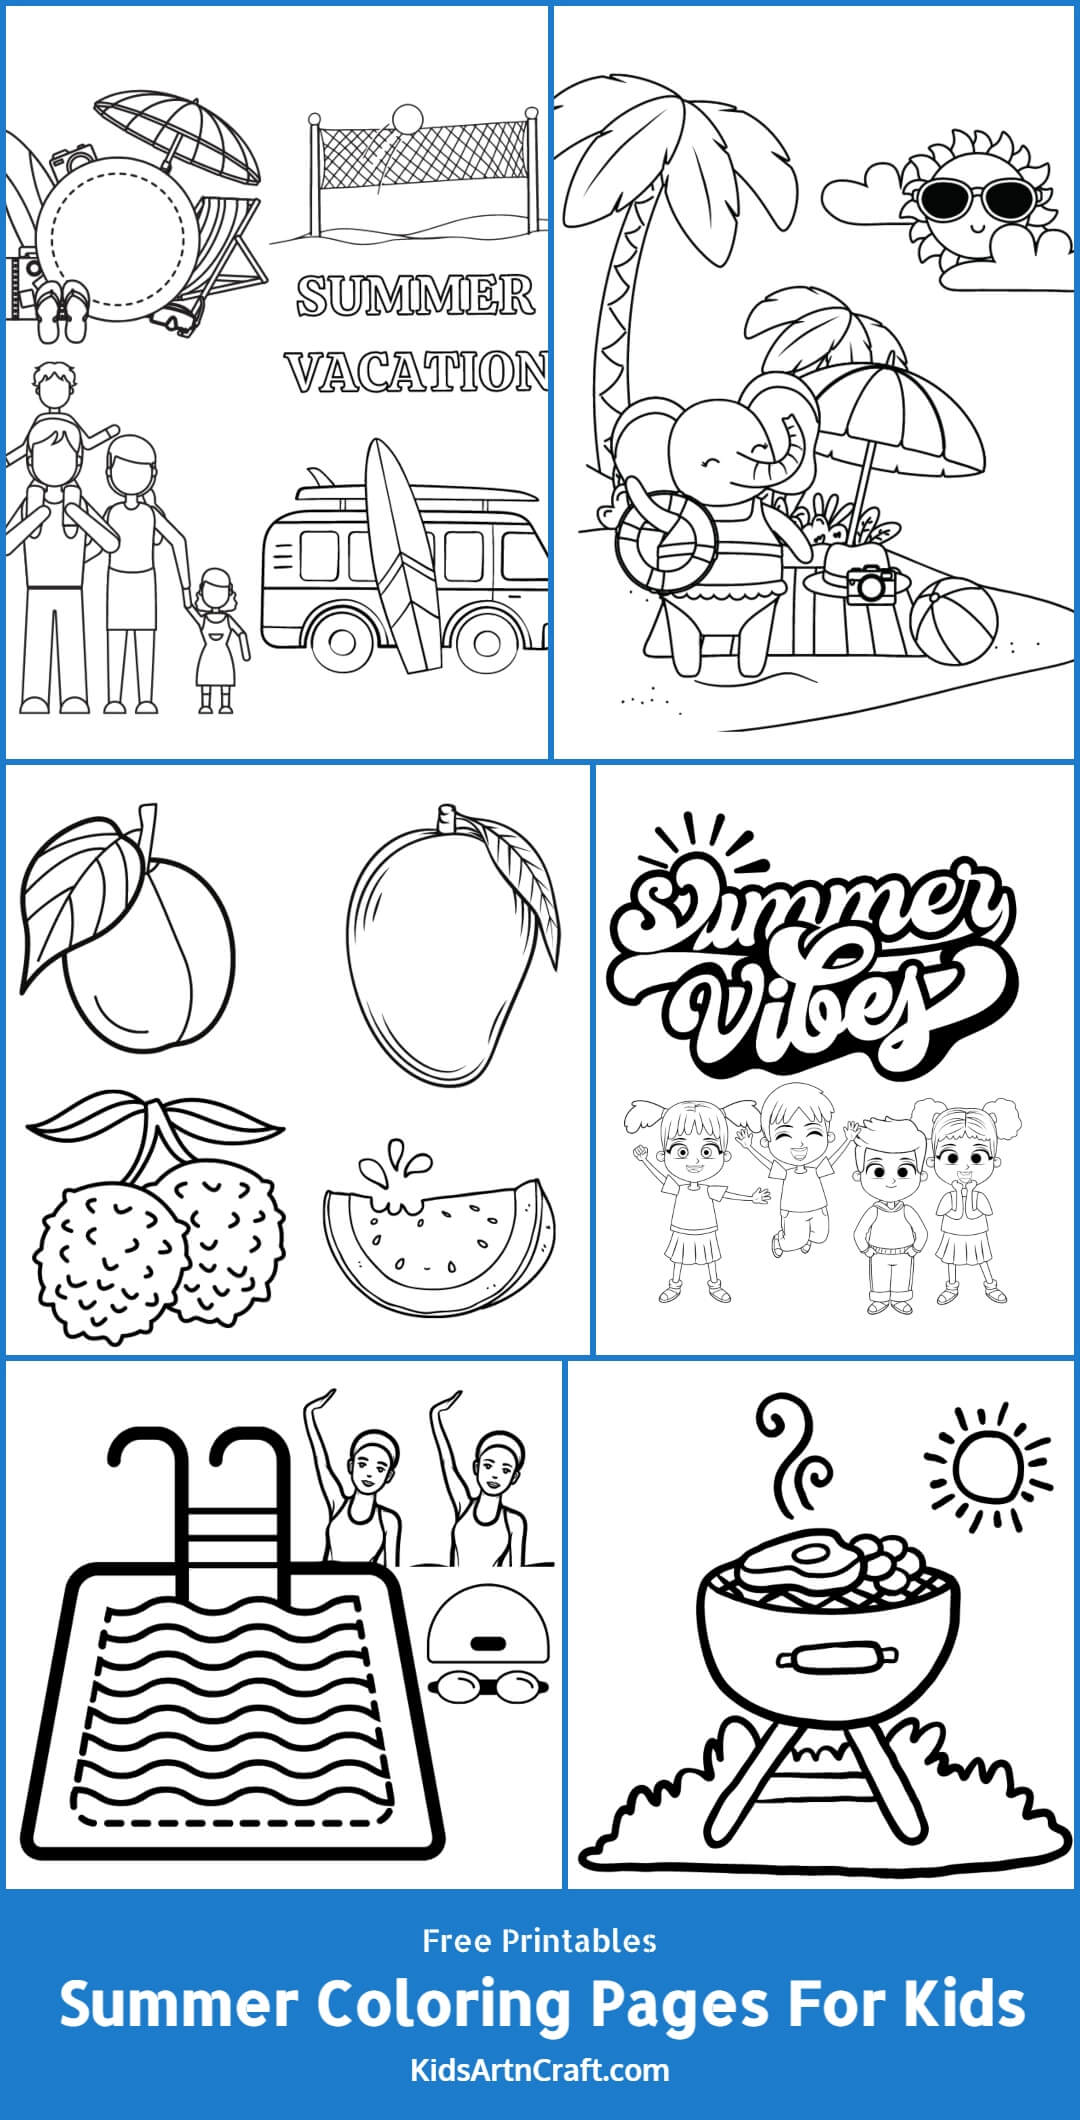 Summer Coloring Pages For Kids – Free Printables